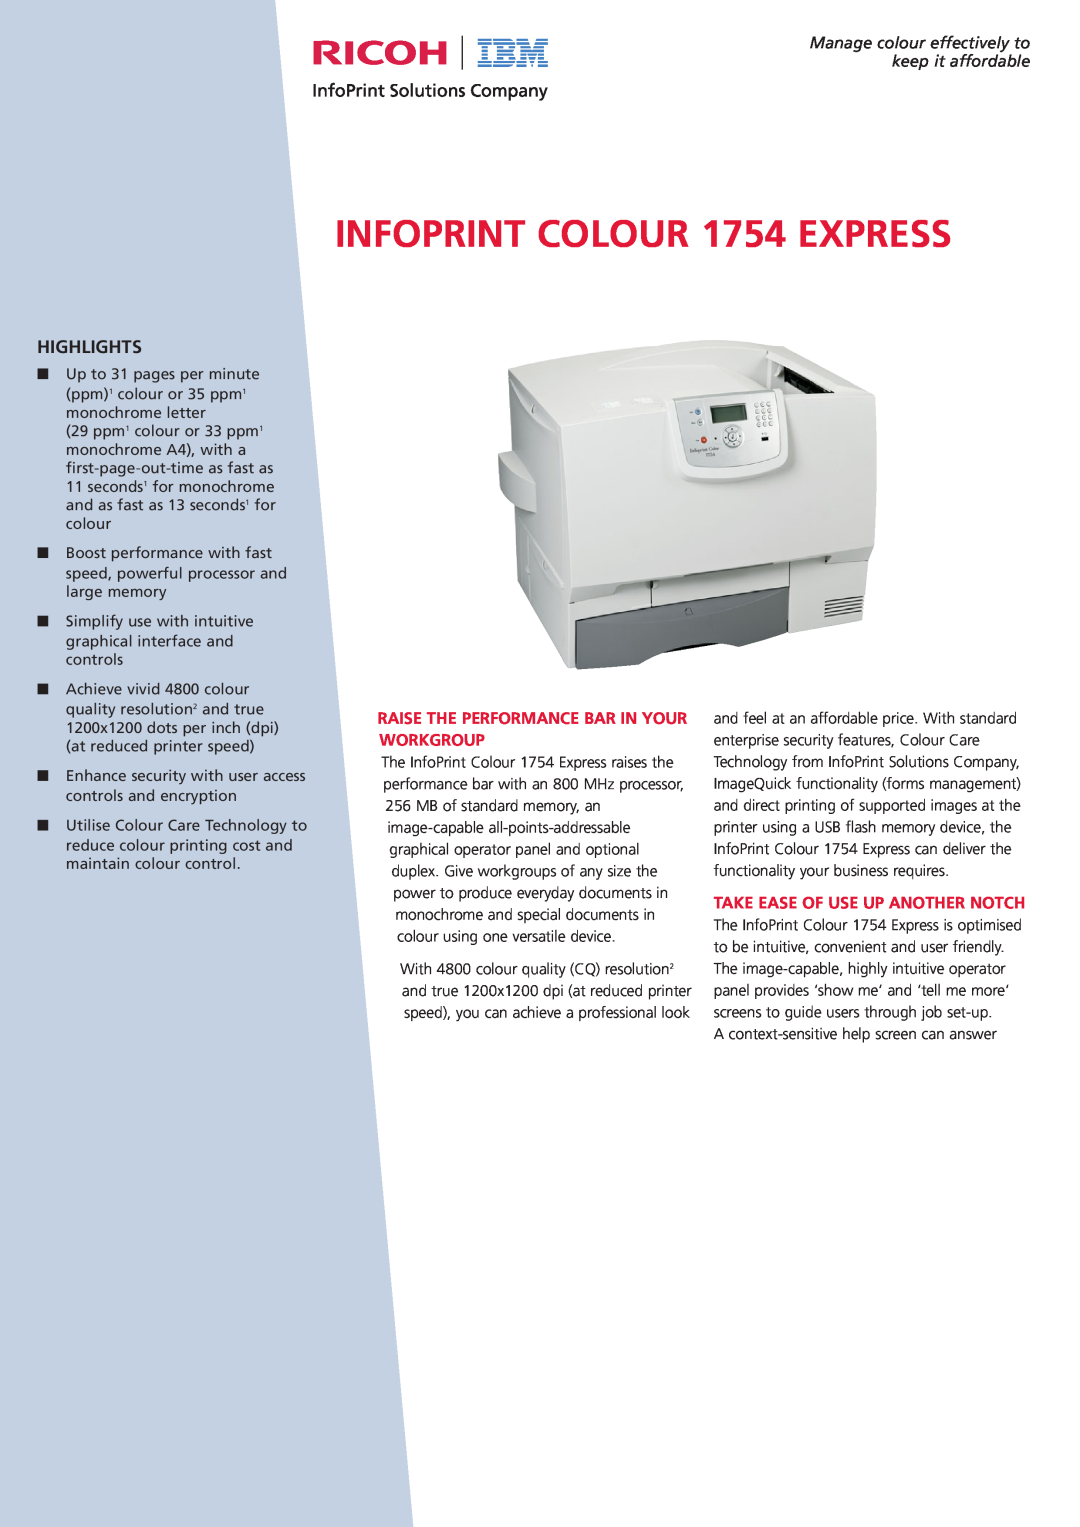 Ricoh 1754 Express manual Raise The Performance Bar In Your Workgroup, Take Ease Of Use Up Another Notch, Highlights 